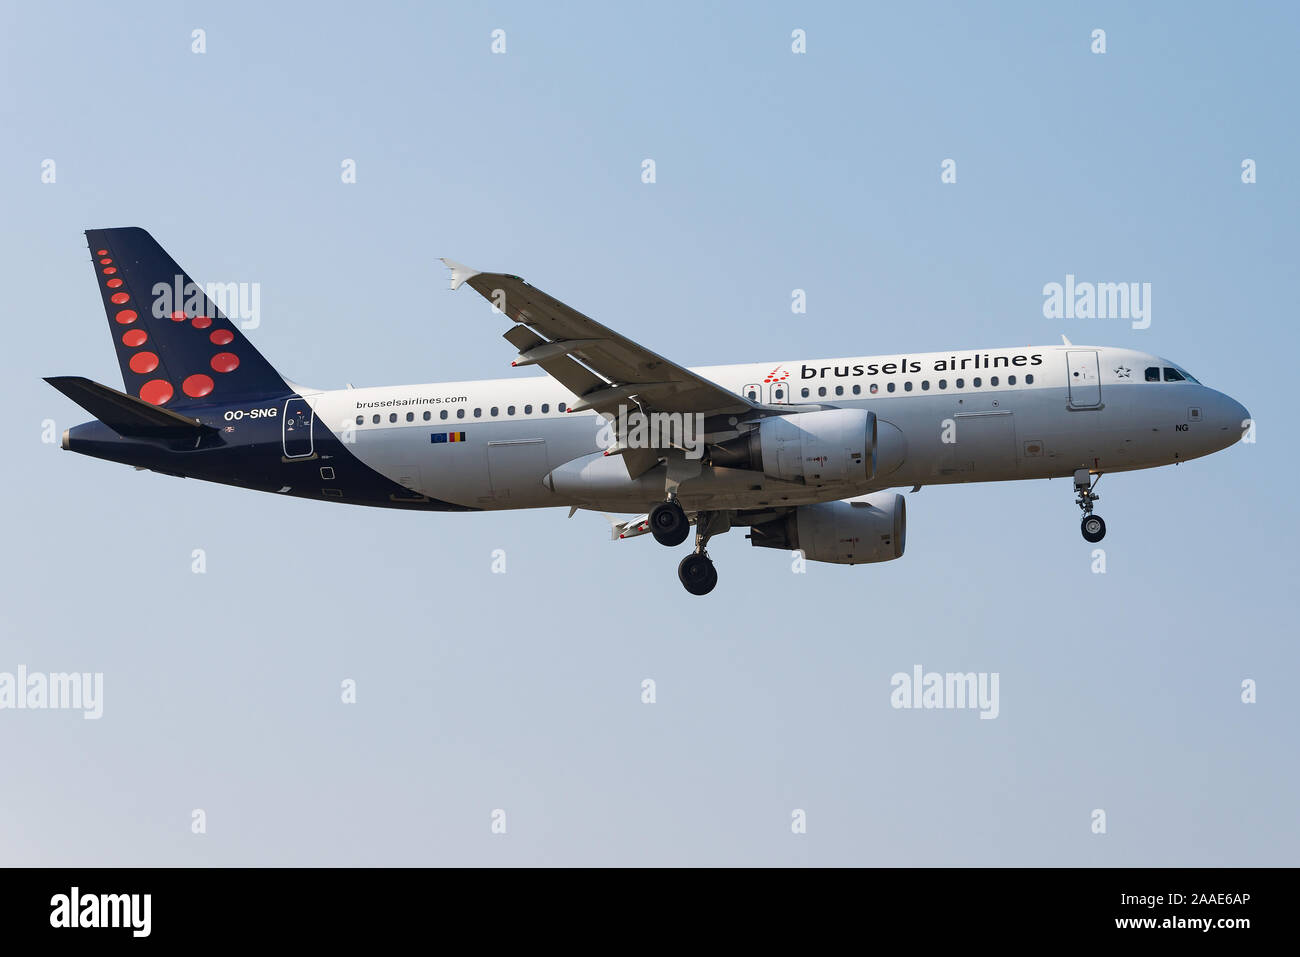 A Brussels Airlines Airbus A320 passenger aircraft is ready to land at Brussels International Airport. Stock Photo